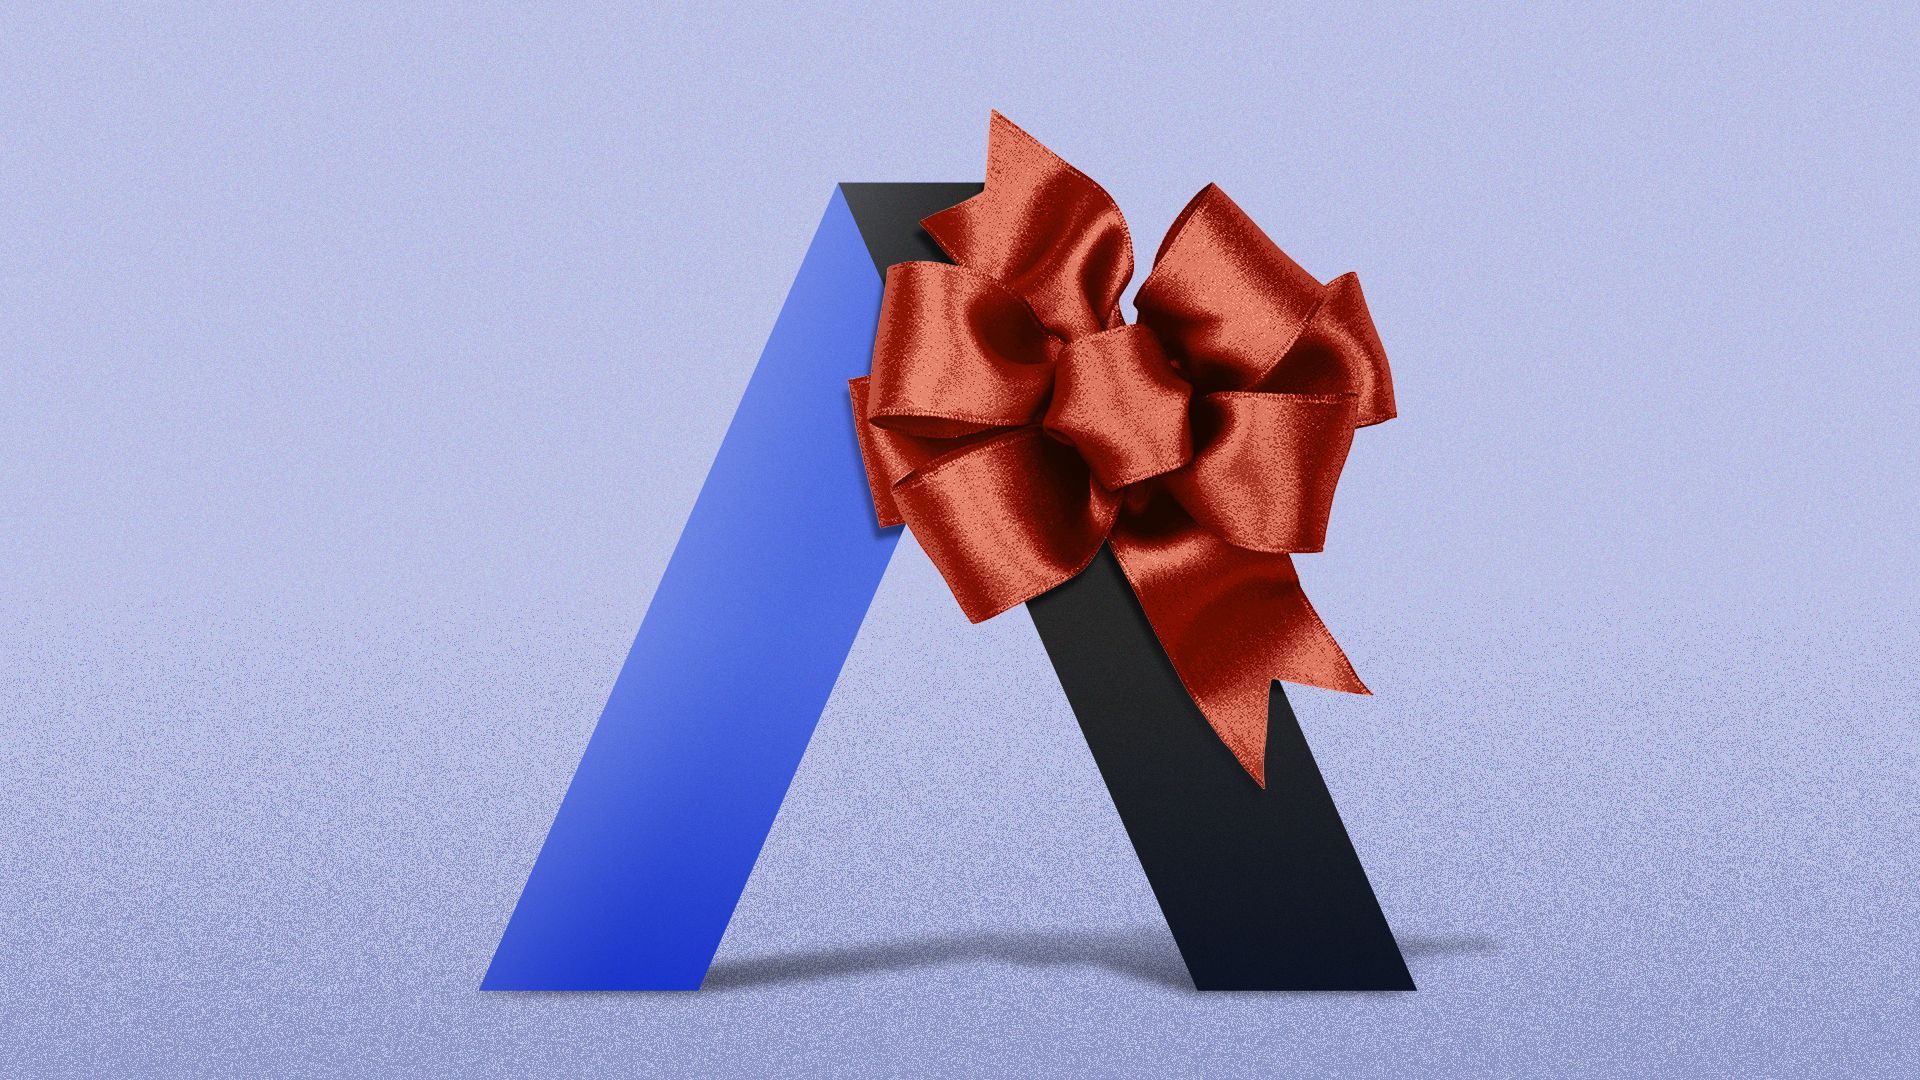 Illustration of the Axios logo with a gift bow on it.